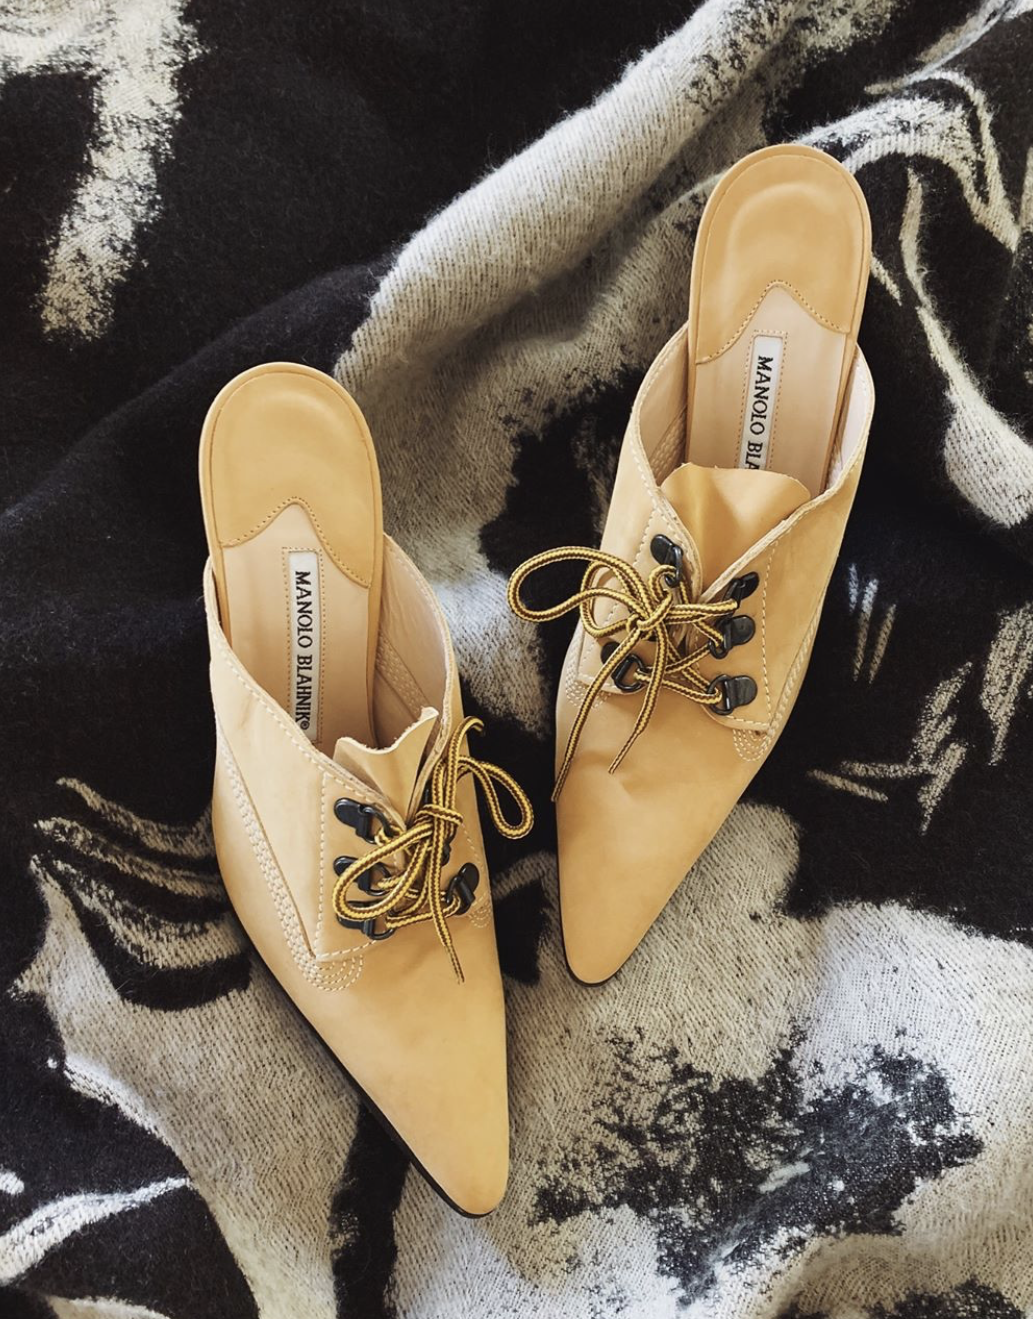 Bomb_Product_of_the_Day_Manolo_Blahnik_Suede_Lace_up_Mules